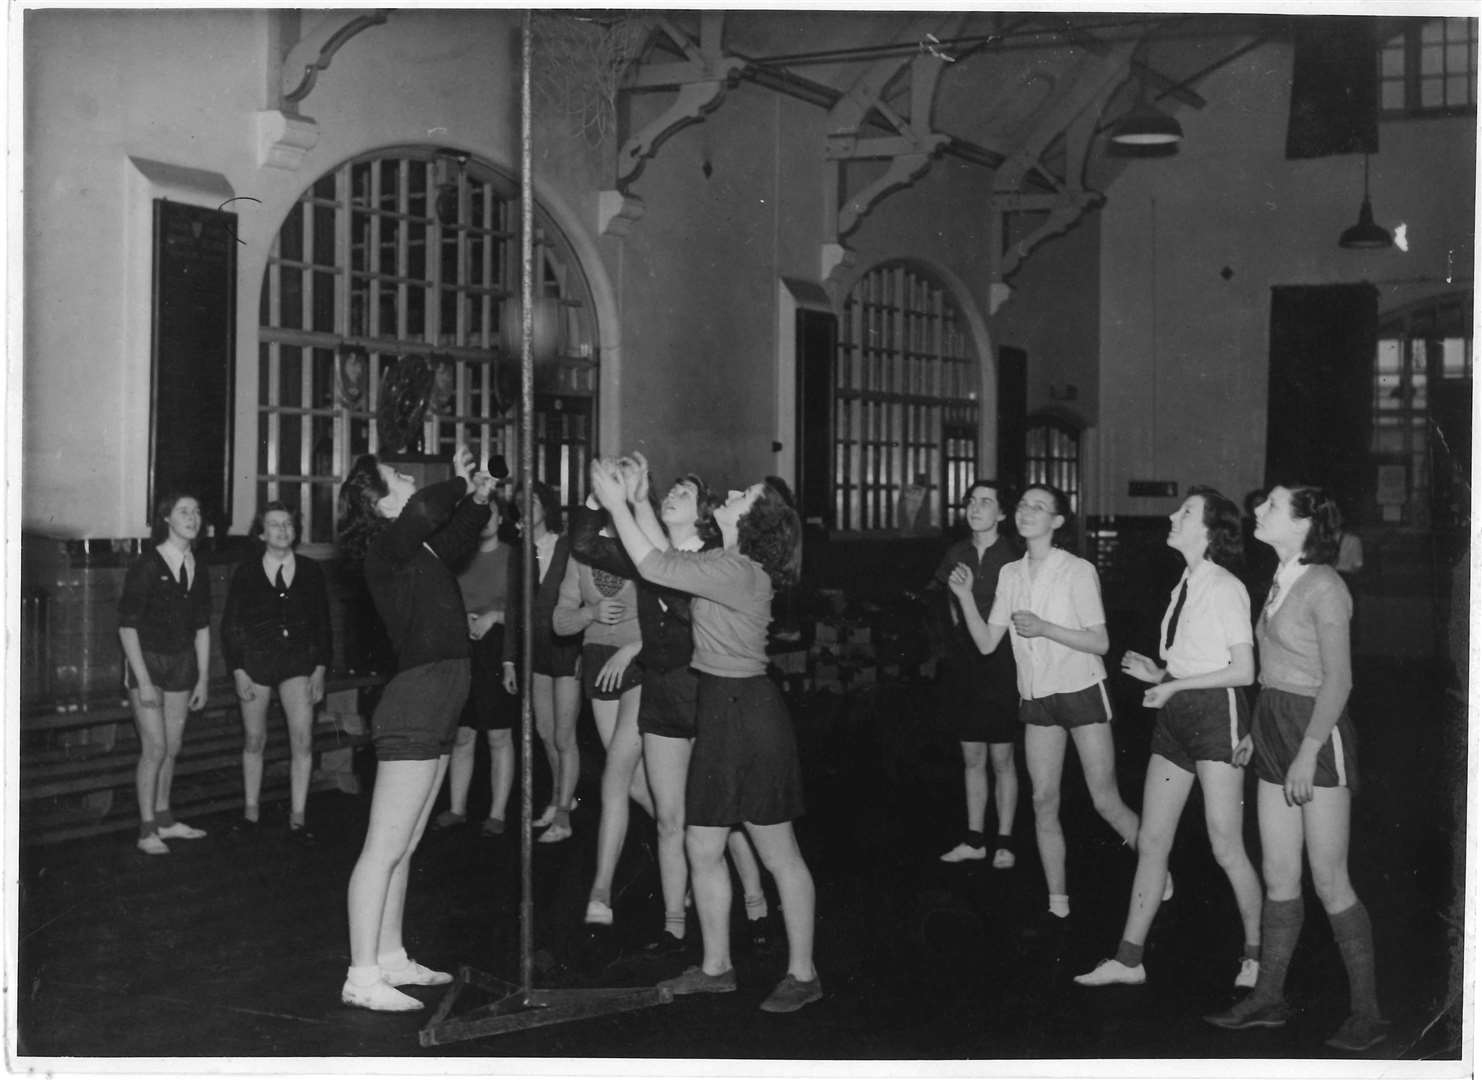 Pam Woolmer shooting in a game of netball at East Borough school, Maidstone. She is to the right of the post, in lighter top at the front. Photo supplied by Pam Woolmer